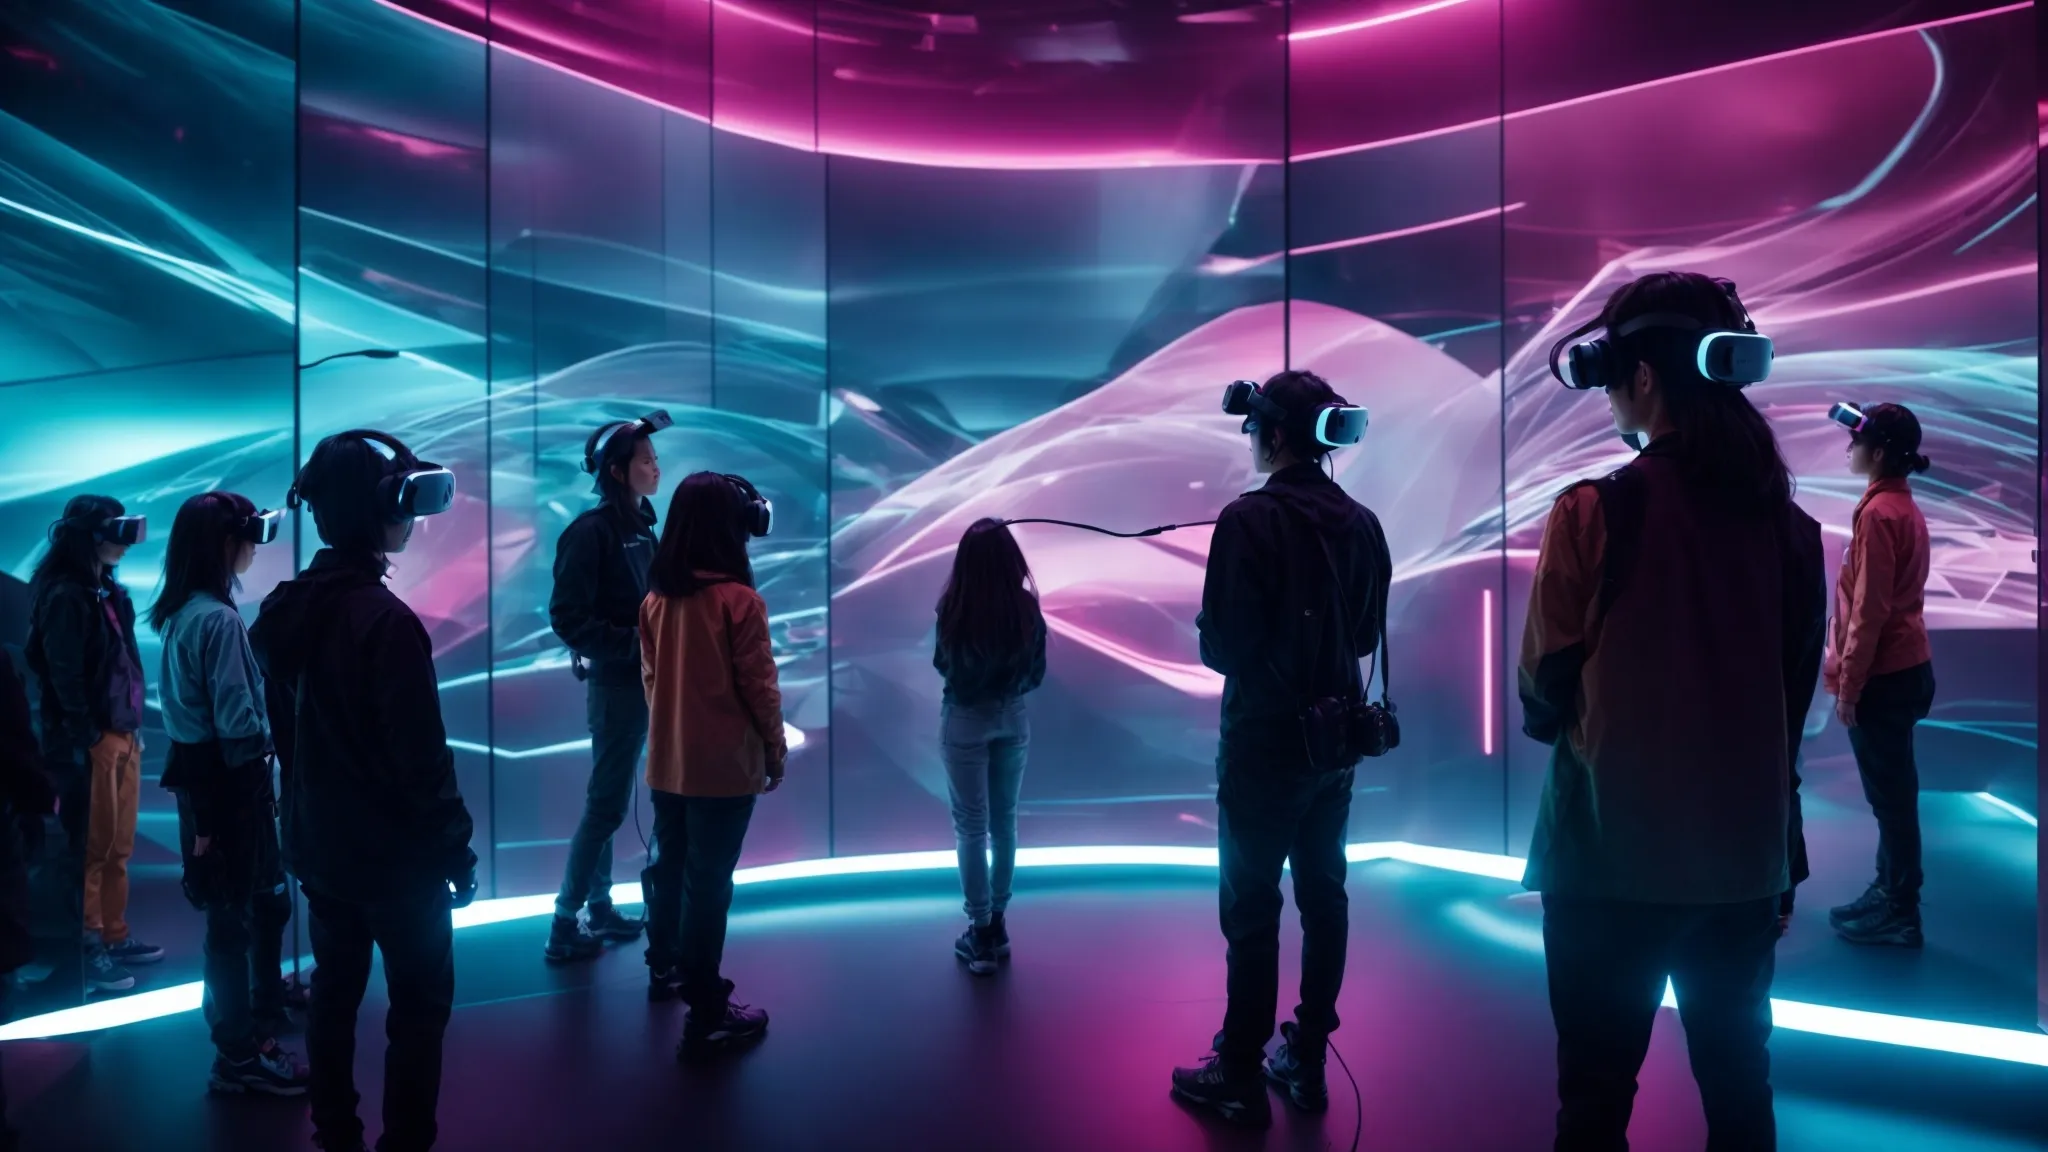 a futuristic room filled with glowing interactive displays and individuals wearing vr headsets, fully immersed in vivid, digital environments.